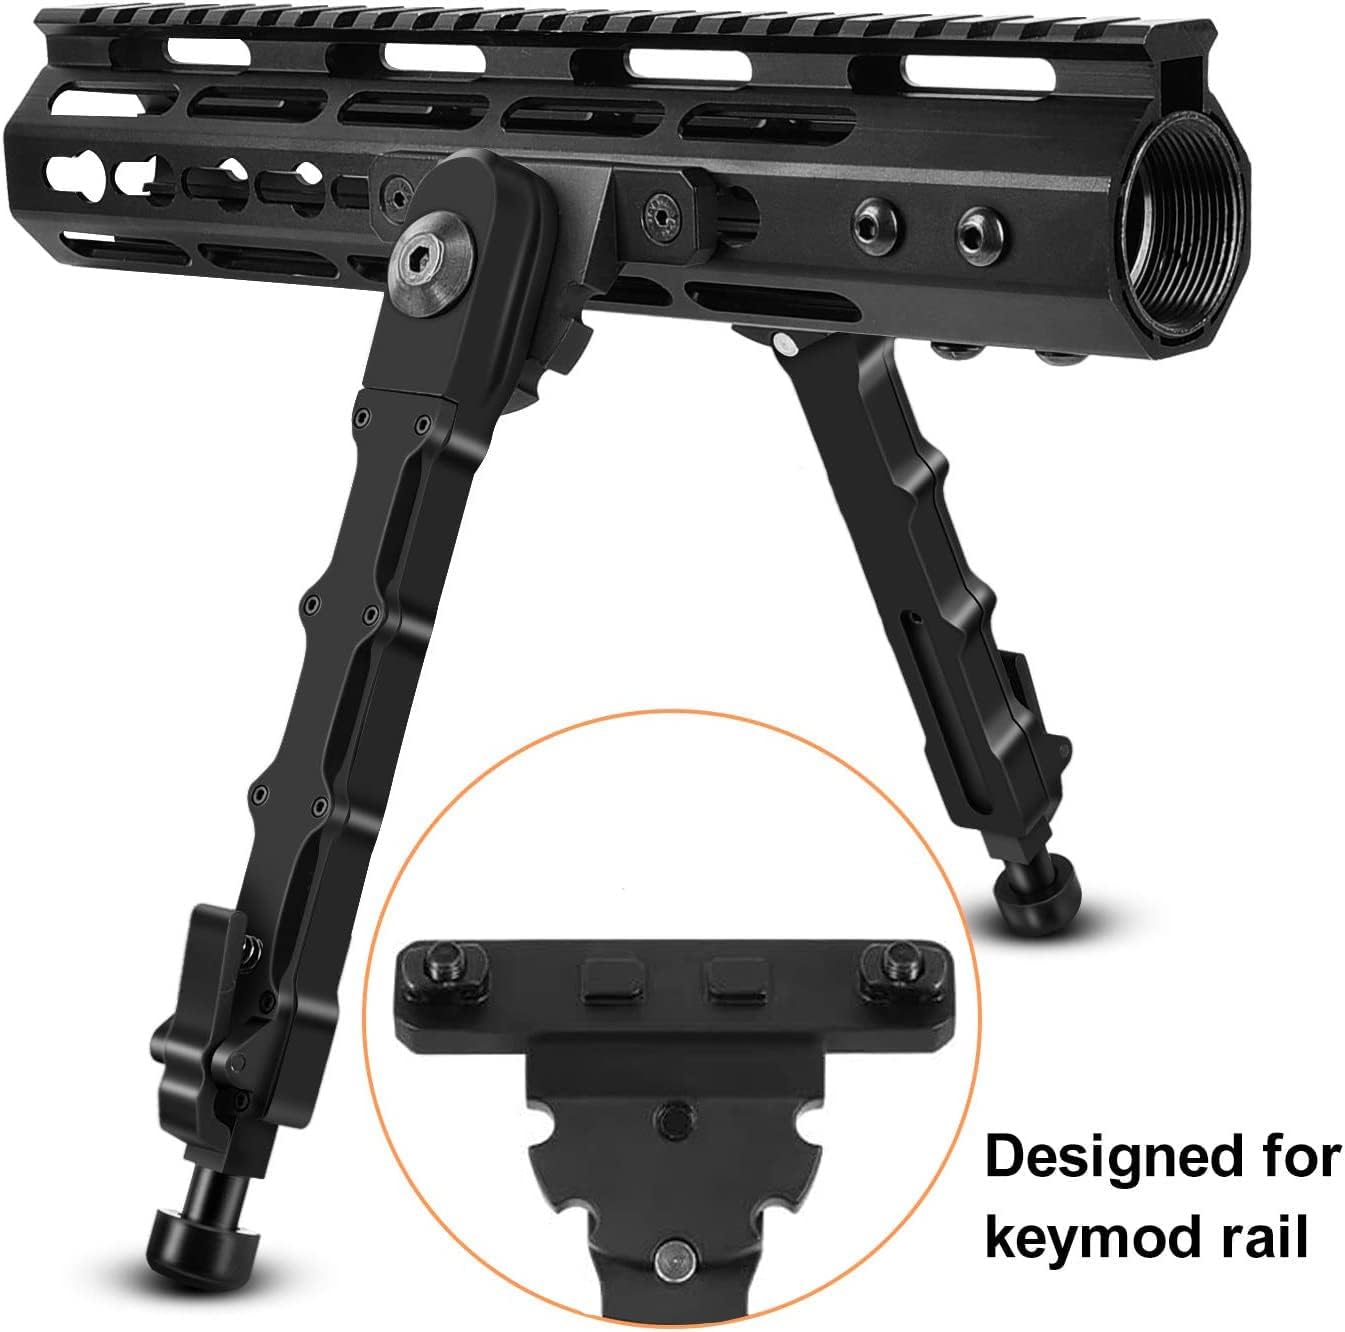 Fooletu 7.5-9 Inches Rifle Bipod for M-Rails, Adjustable,Attach Directly Bipod for Shooting, Hunting, Range and Outdoors